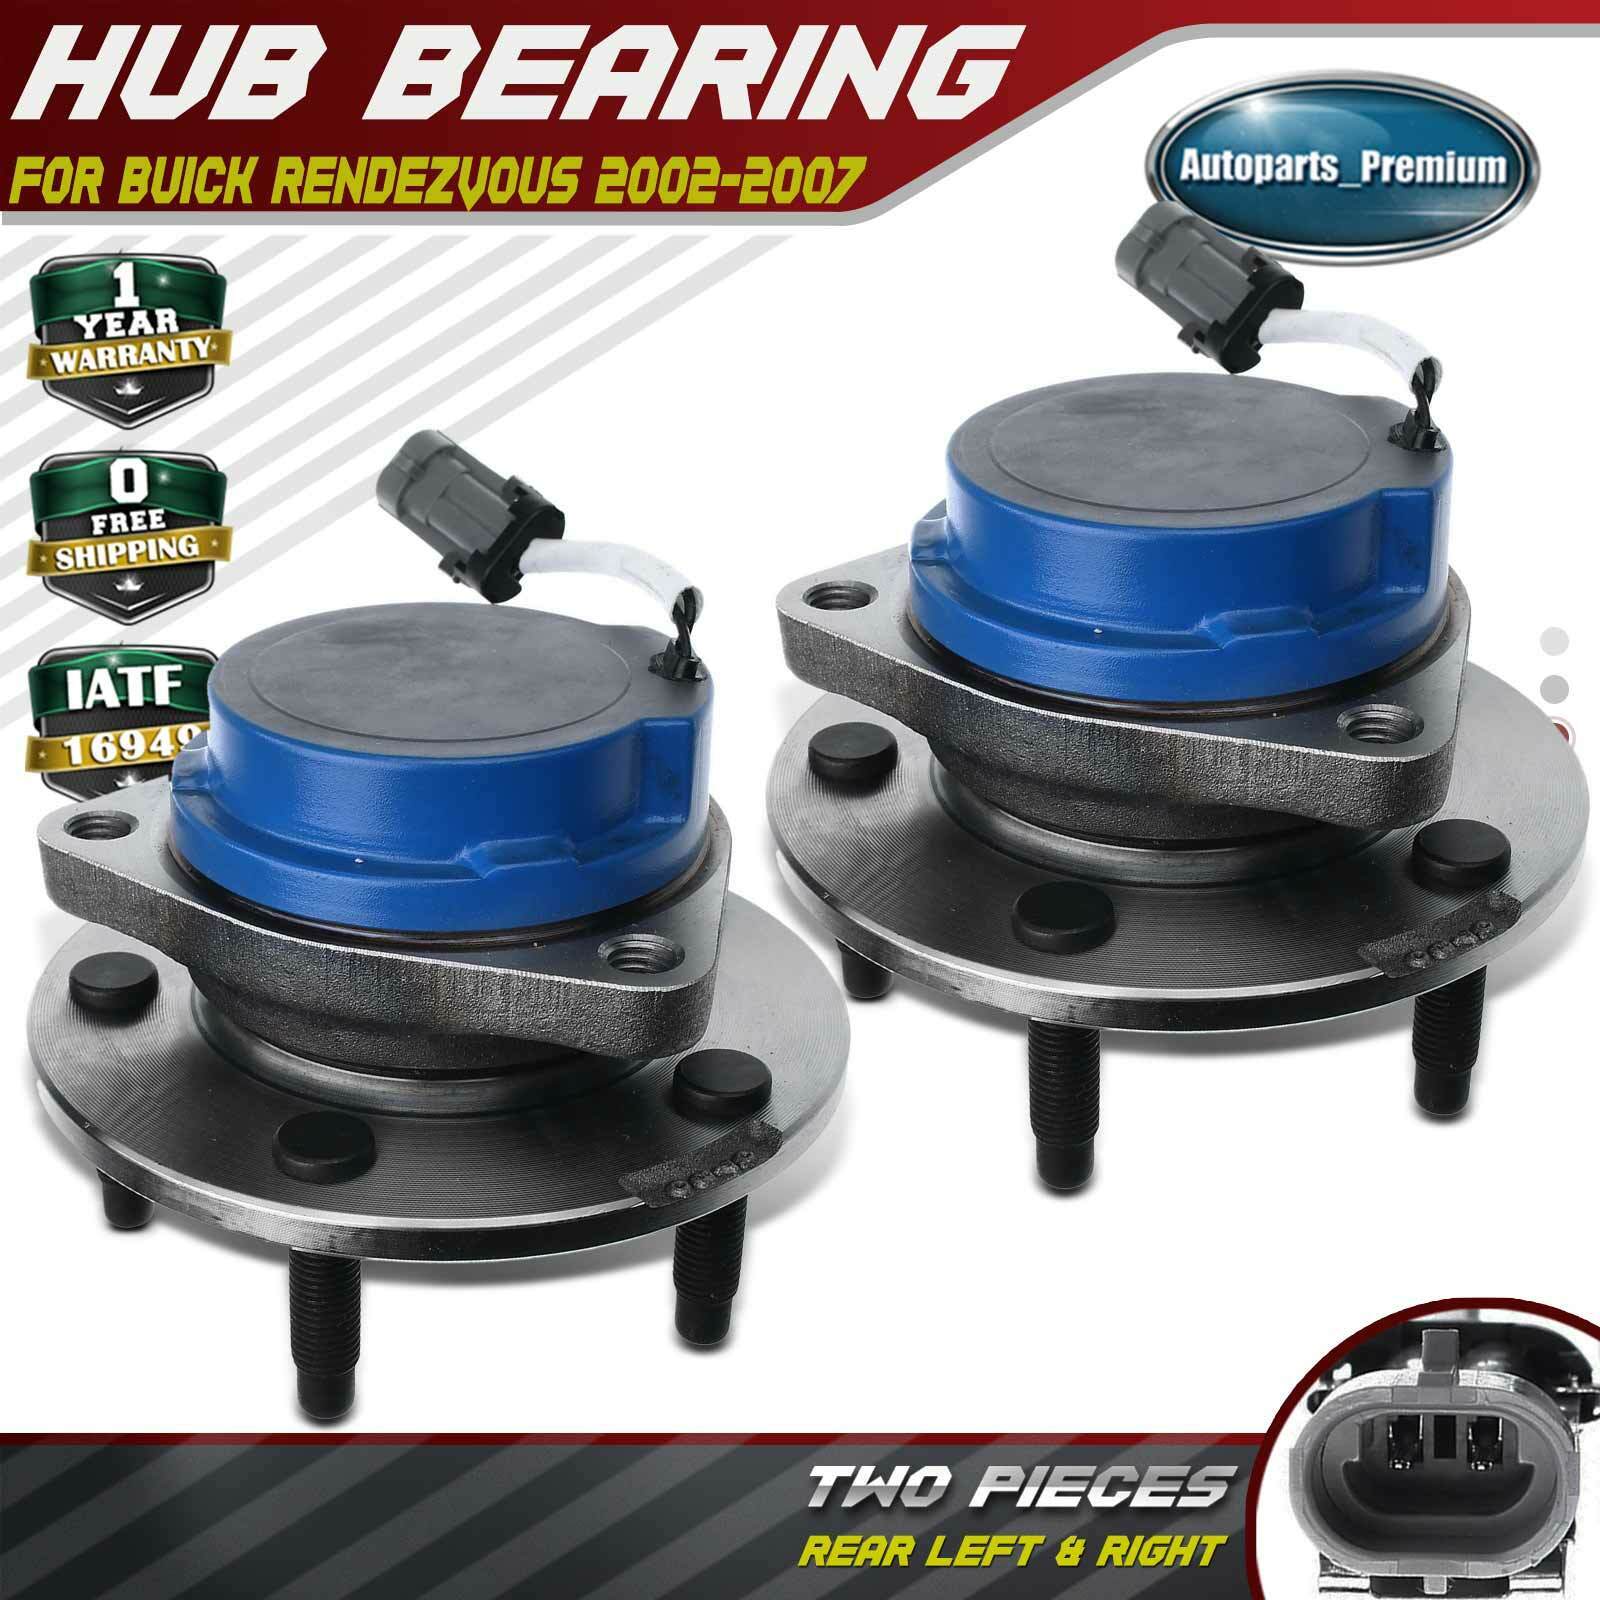 2x Rear Left & Right Wheel Hub Bearing Assembly for Buick Rendezvous 02-07 FWD